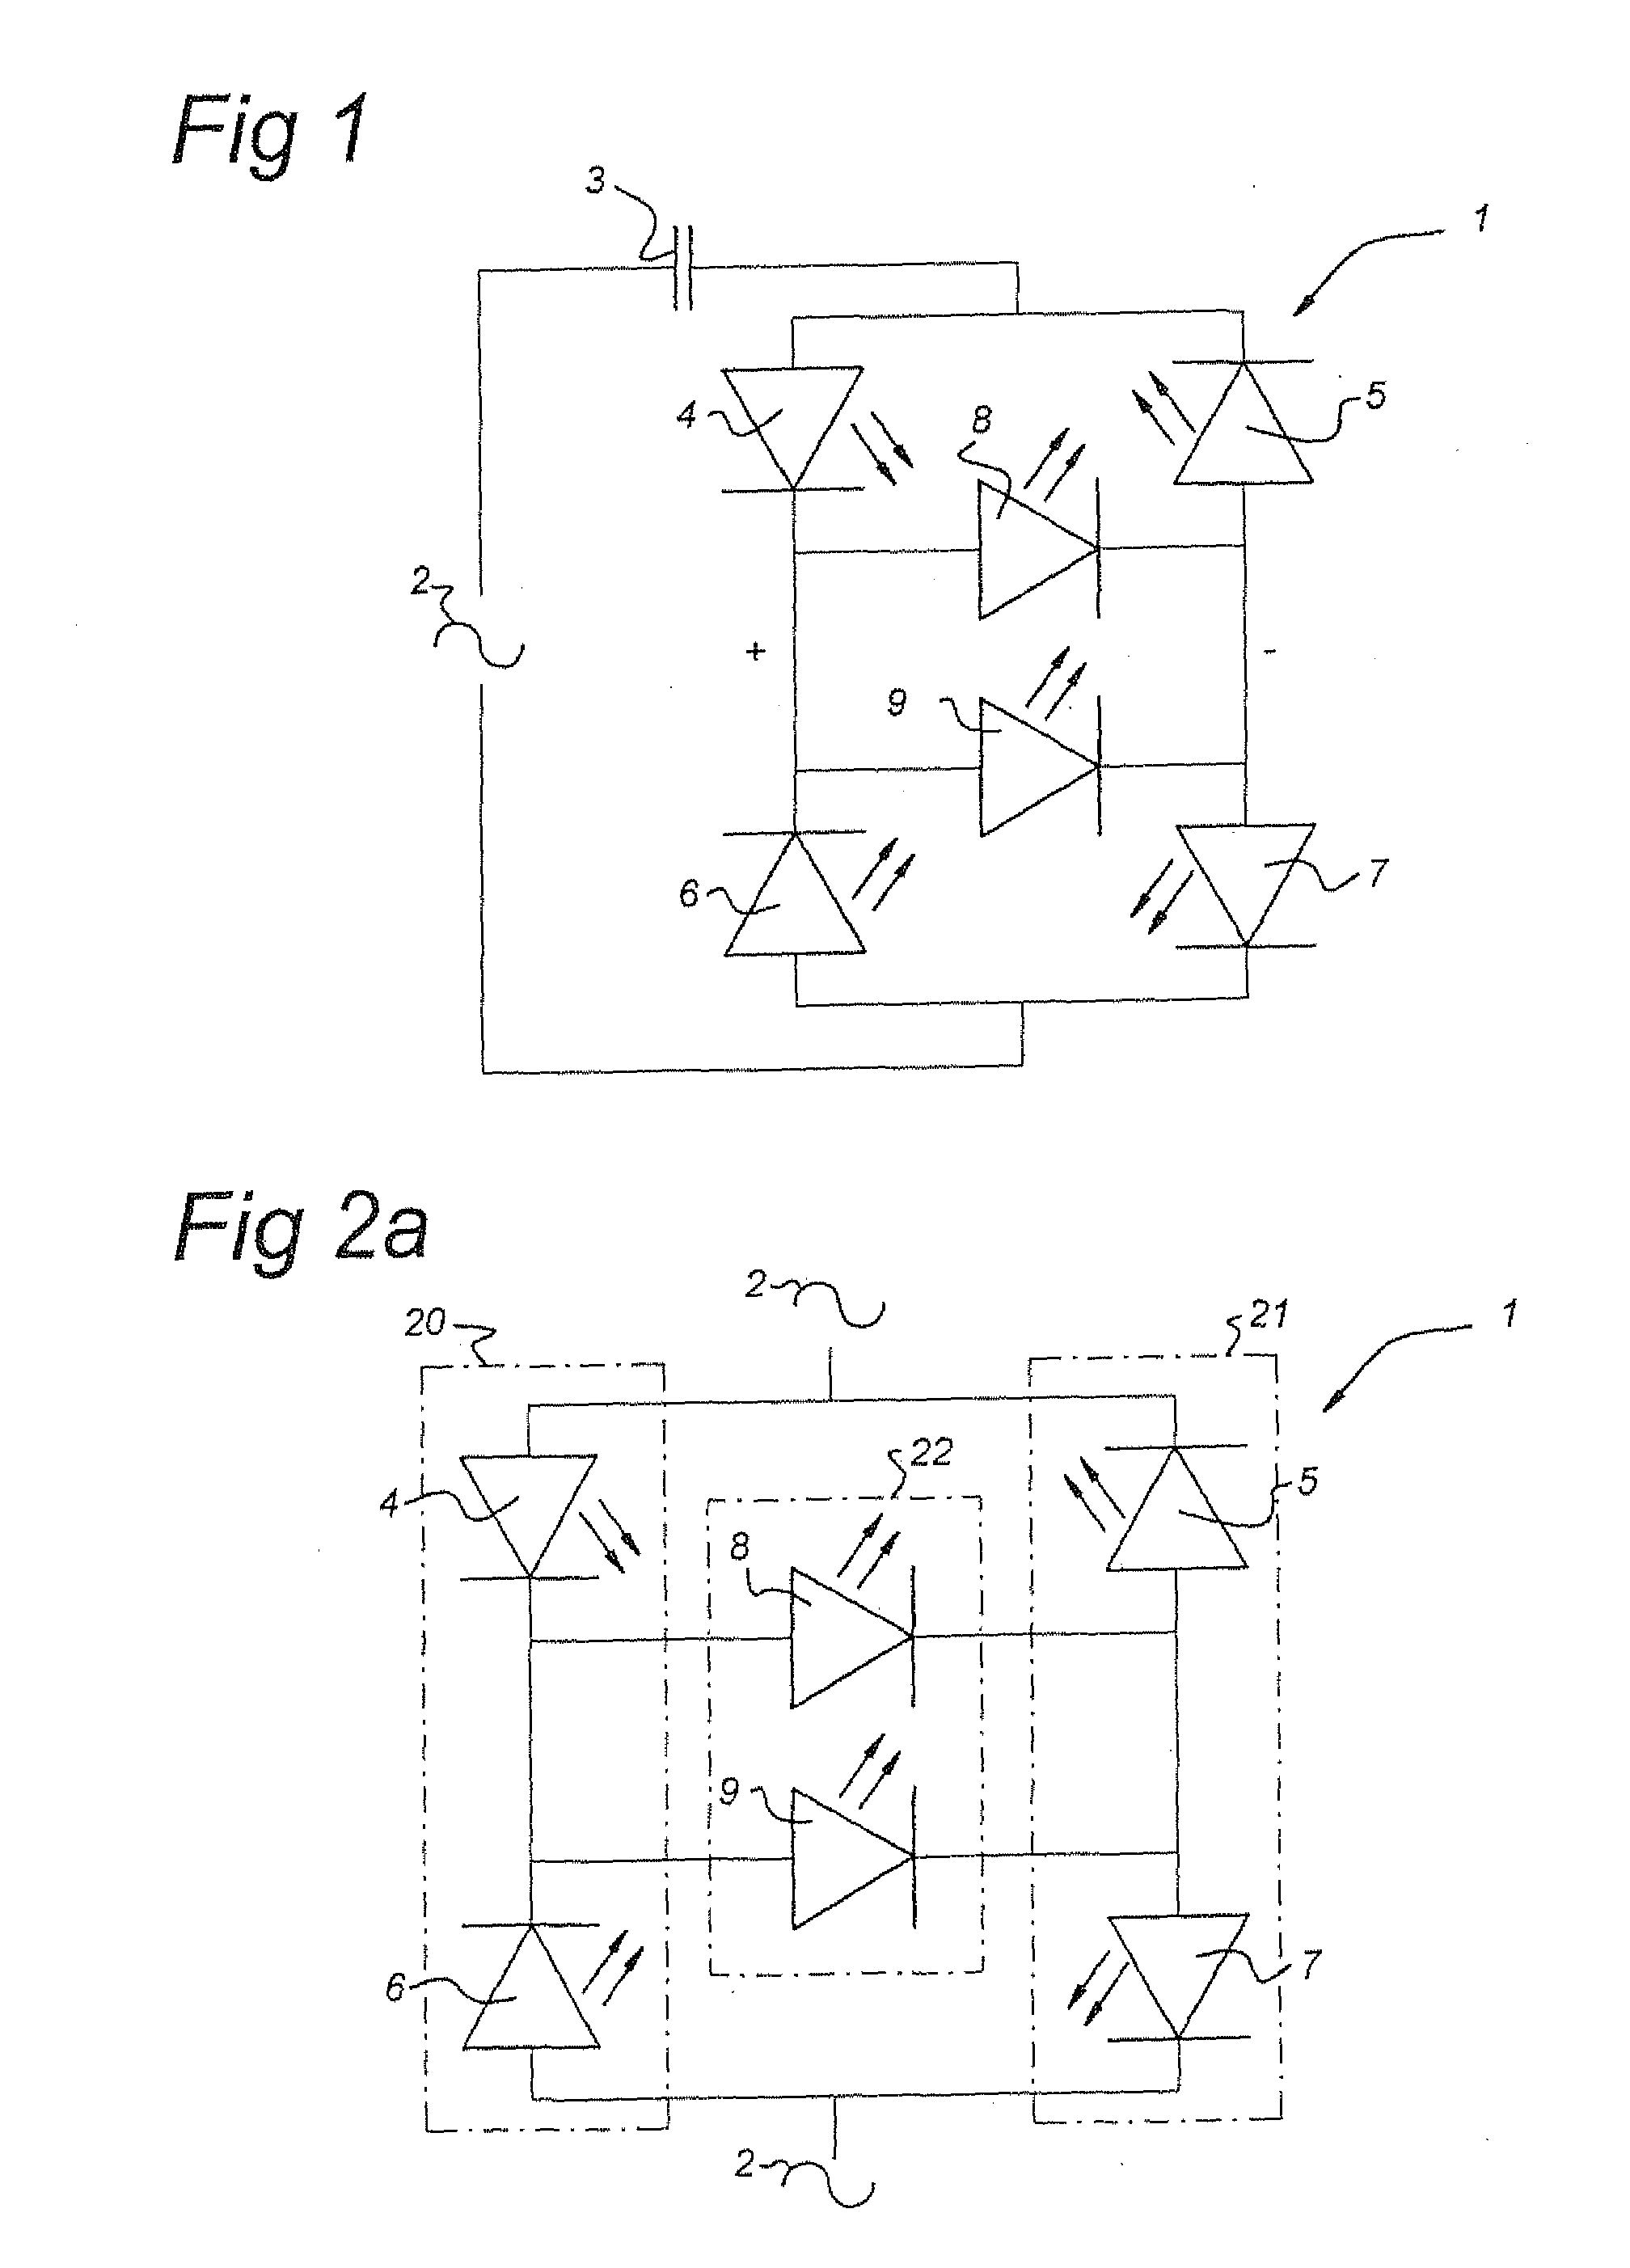 Method for Preparing an Electric Circuit Comprising Multiple Leds